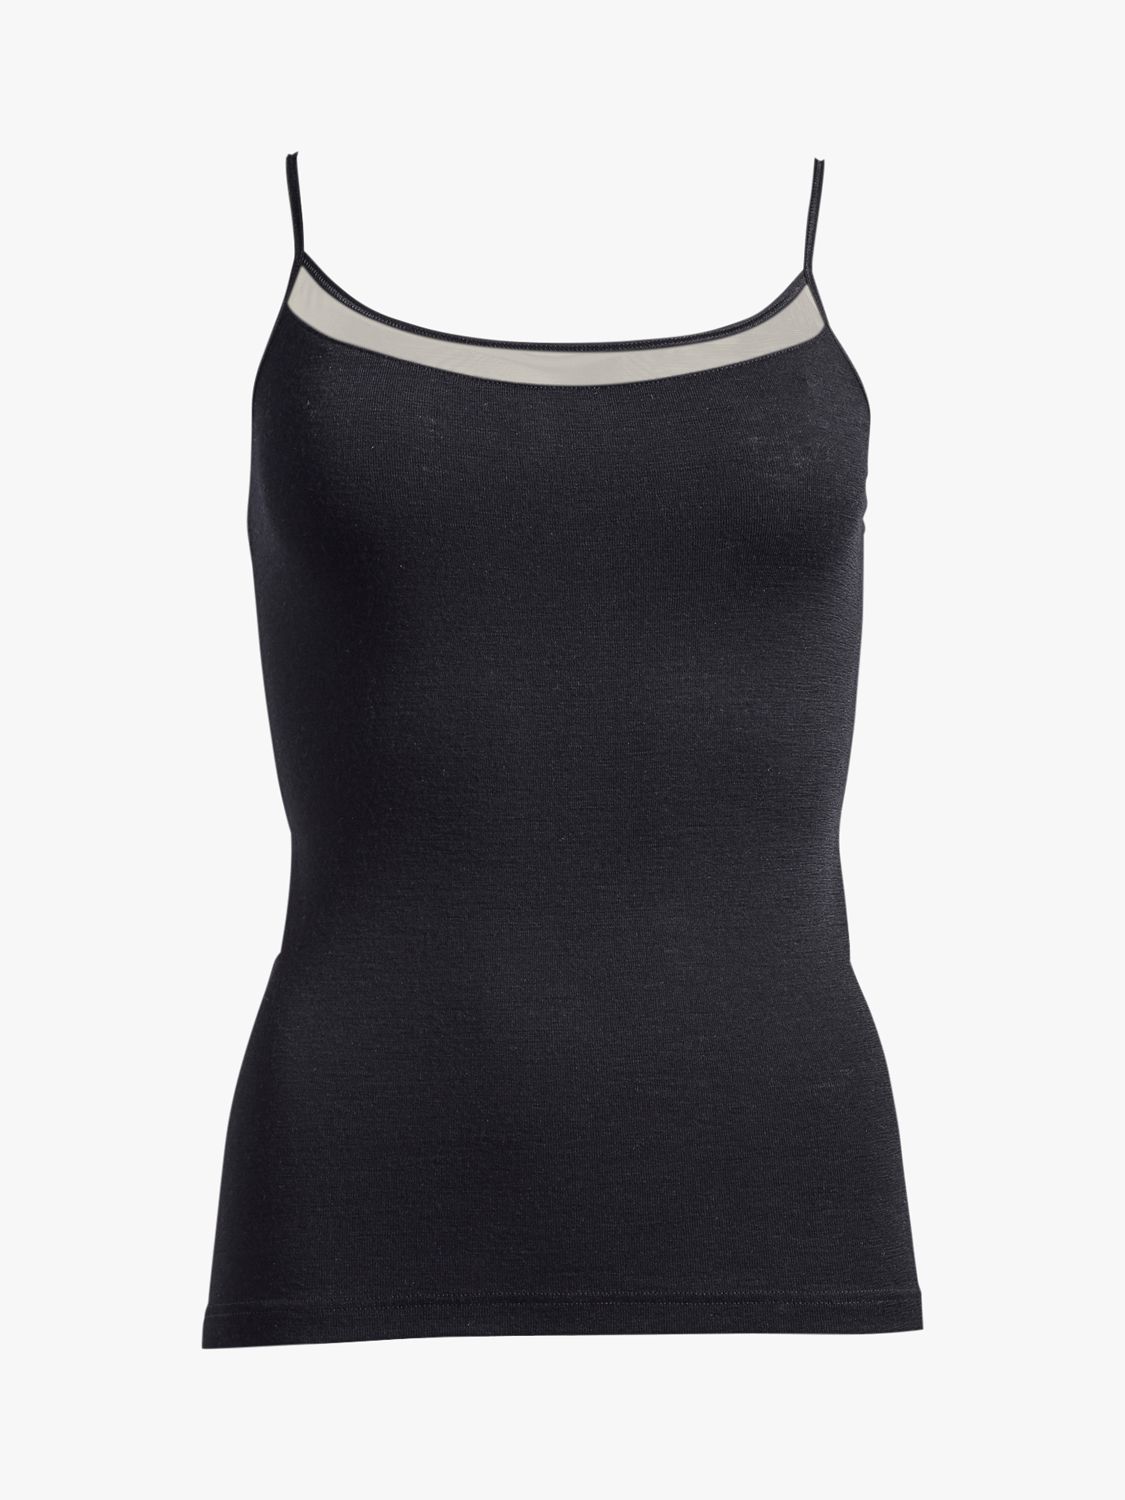 SOFTWOOL – MERINO WOOL & SILK THERMAL CAMISOLE FROM MEY - Facets Fashion